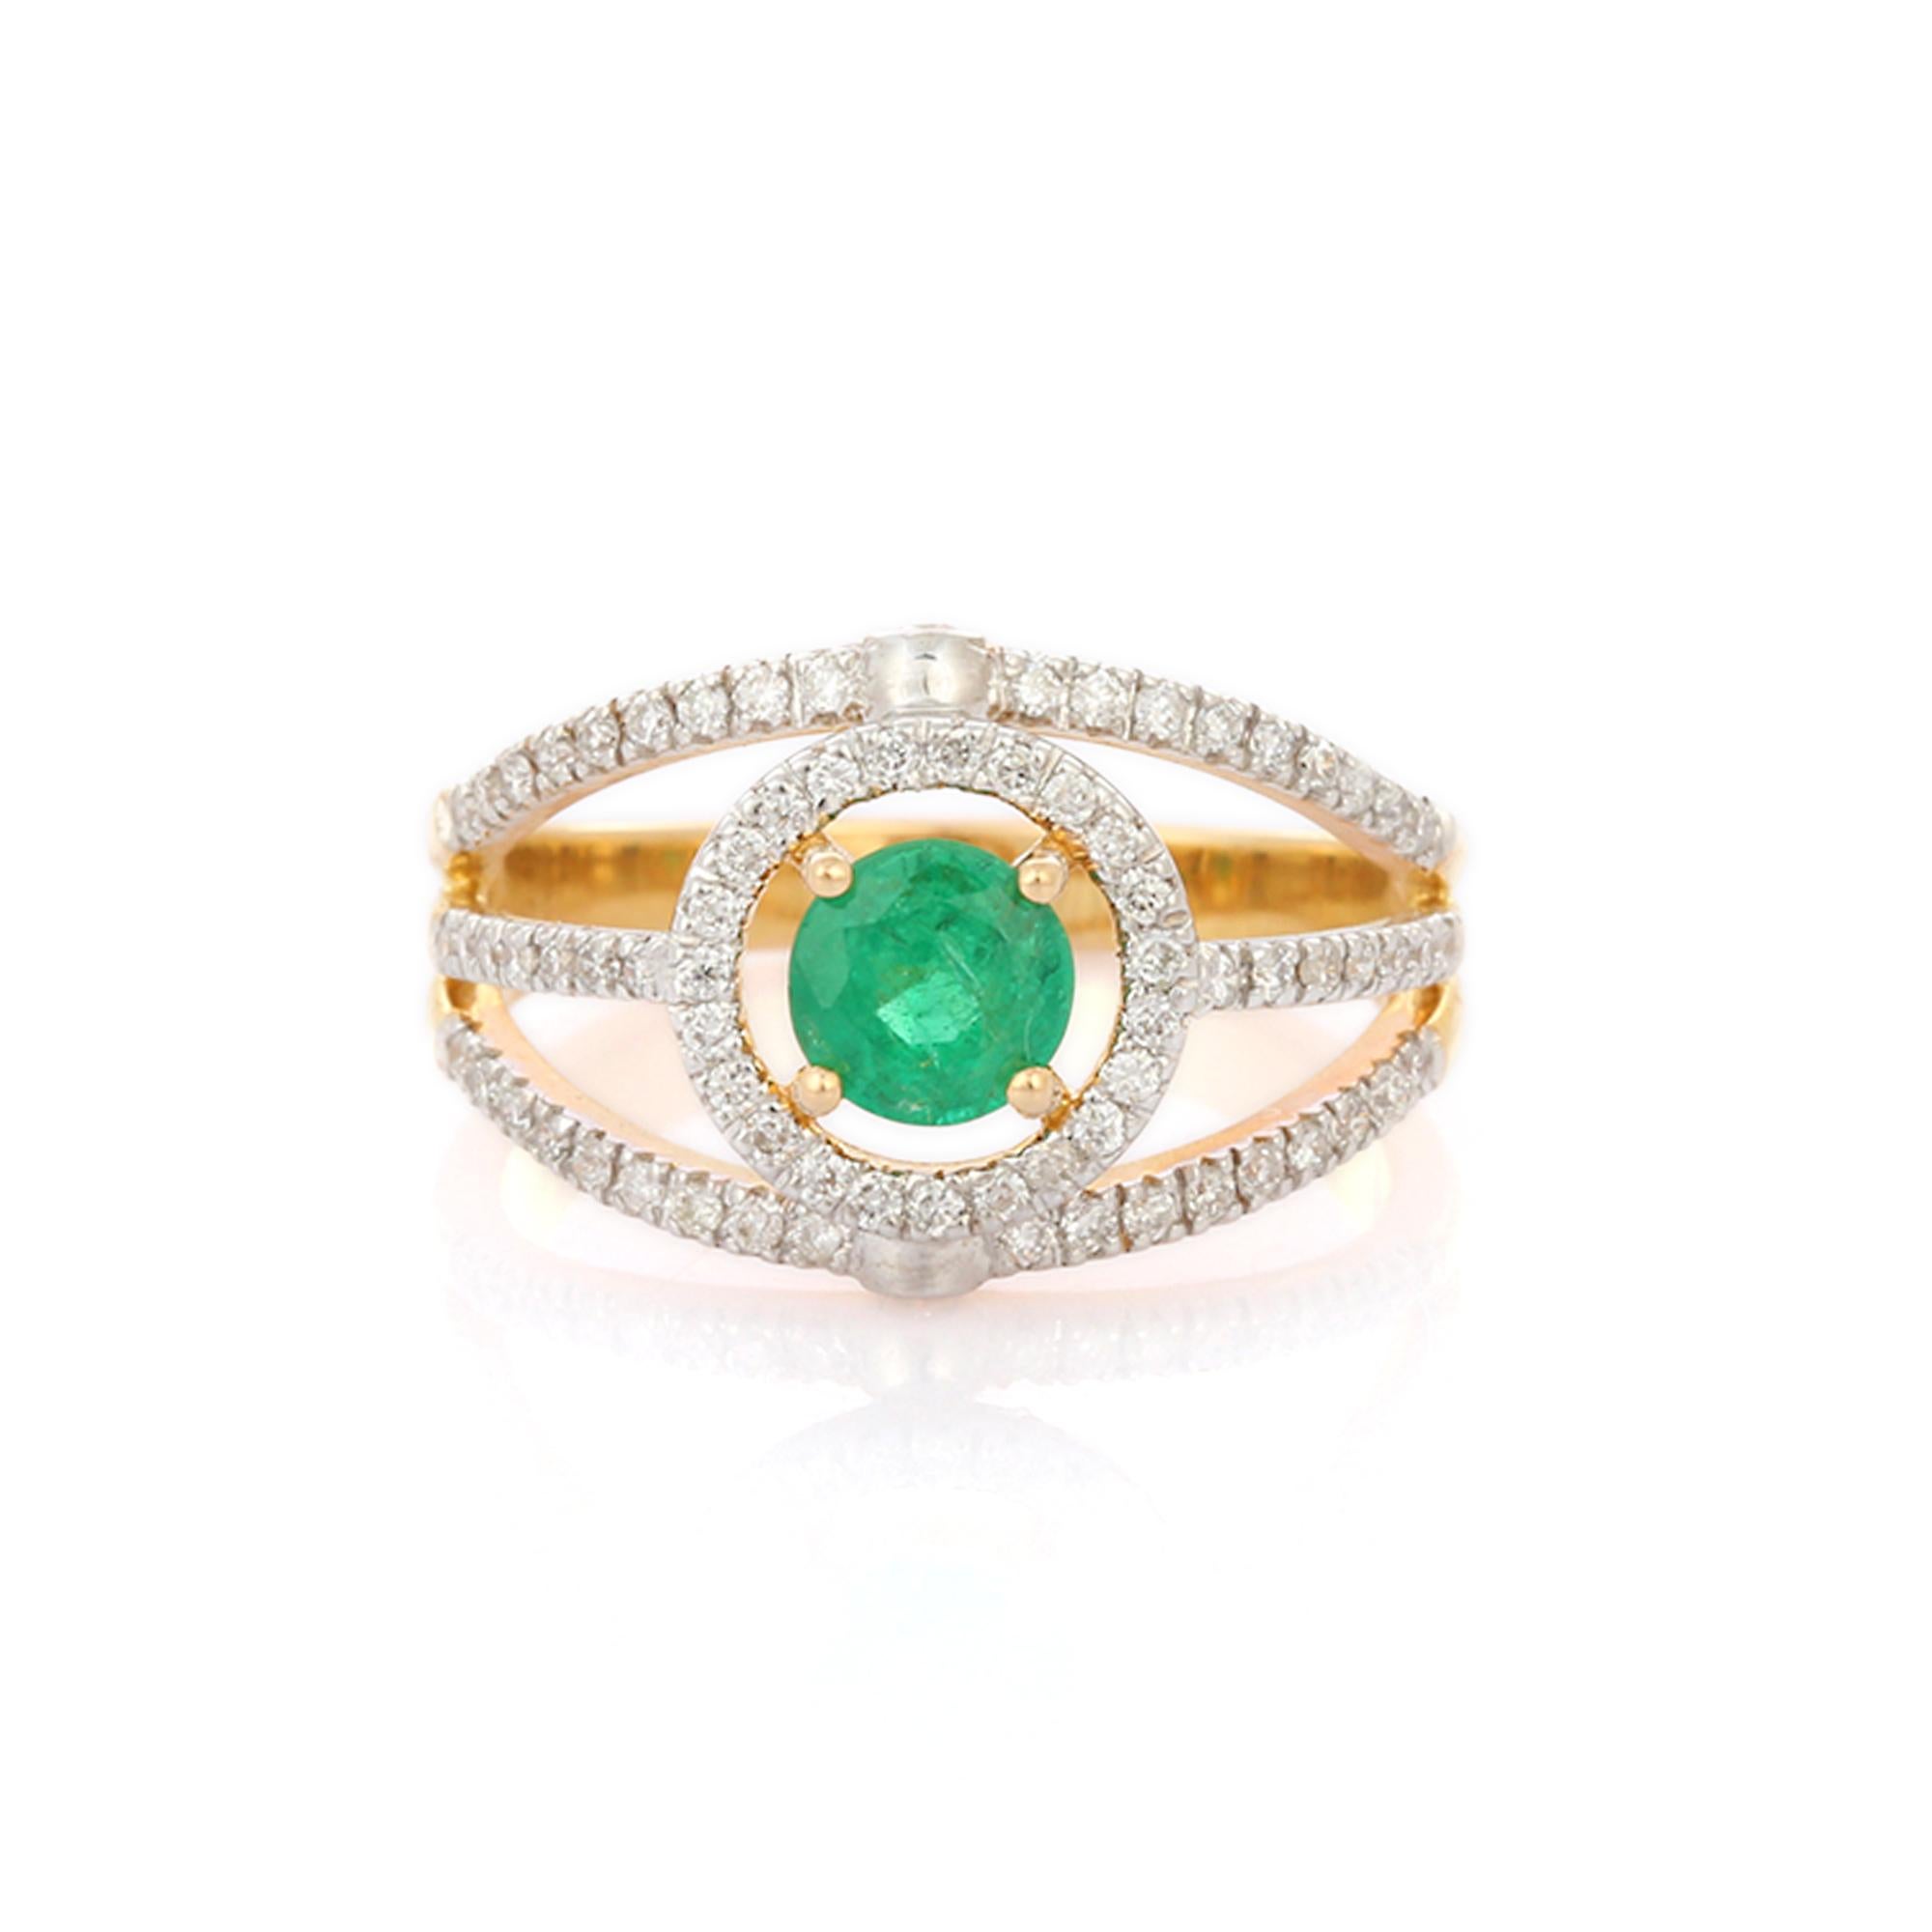 For Sale:  18K Yellow Gold Brilliant Cut Round Emerald and Diamond Studded Wedding Ring 5